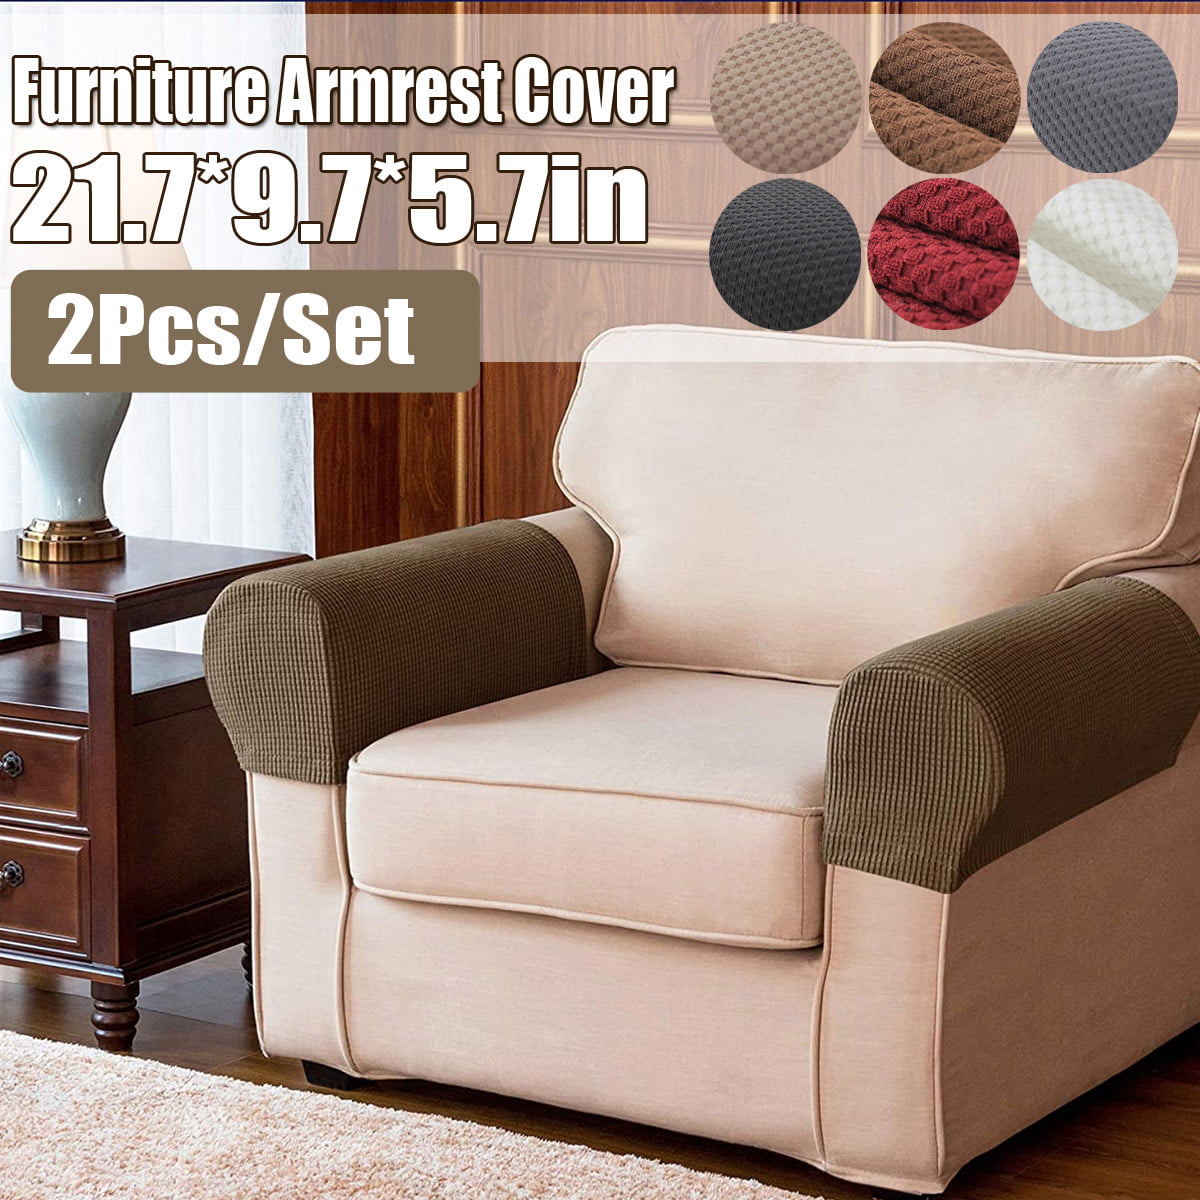 Chair Arm Covers Armrest Chair Slip Cover for Recliners ...